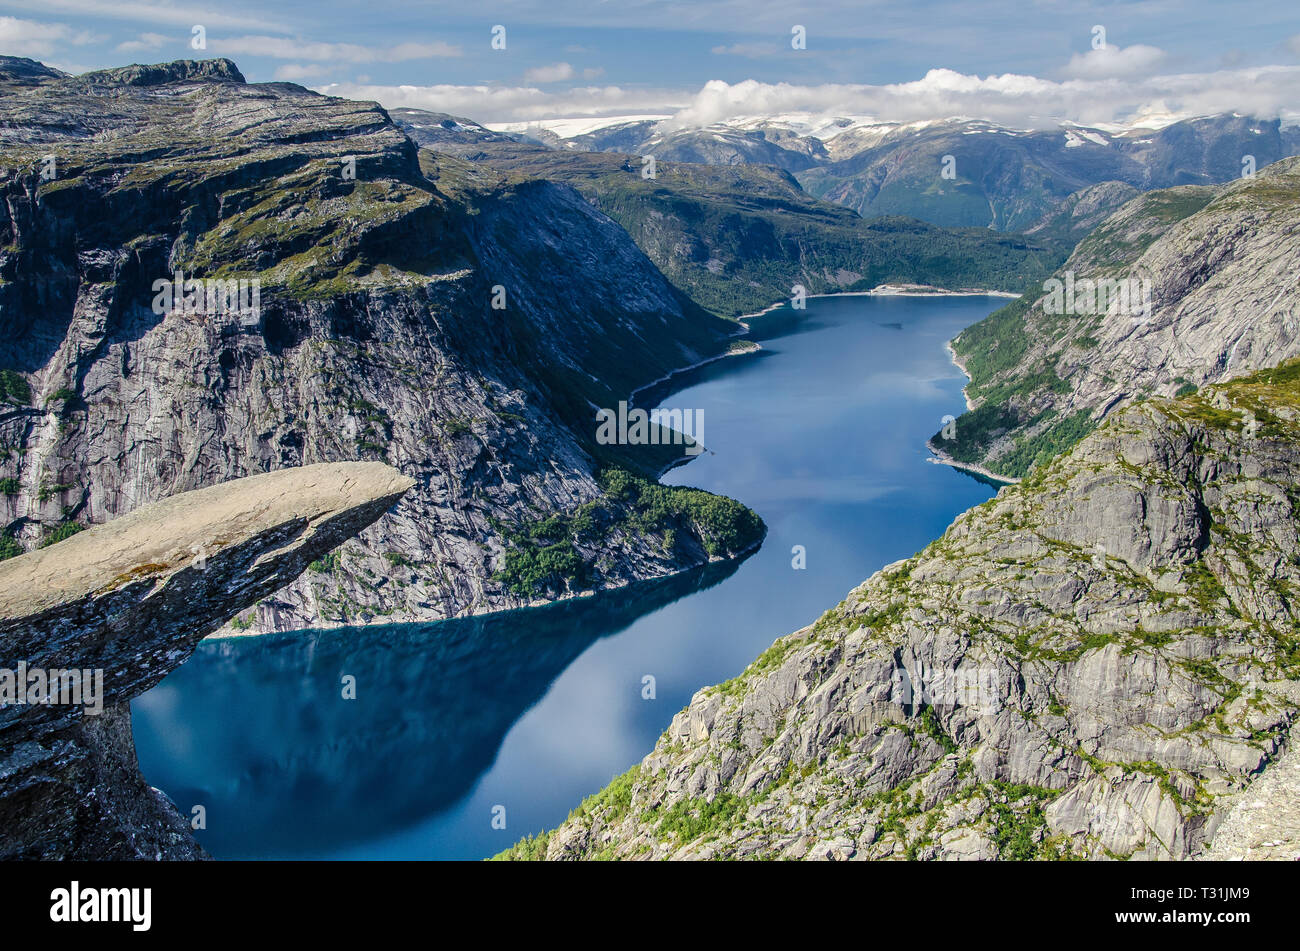 Spectacular view of Trolltunga rock with a blue lake 700 meters lower and interesting sky with few clouds. Stock Photo